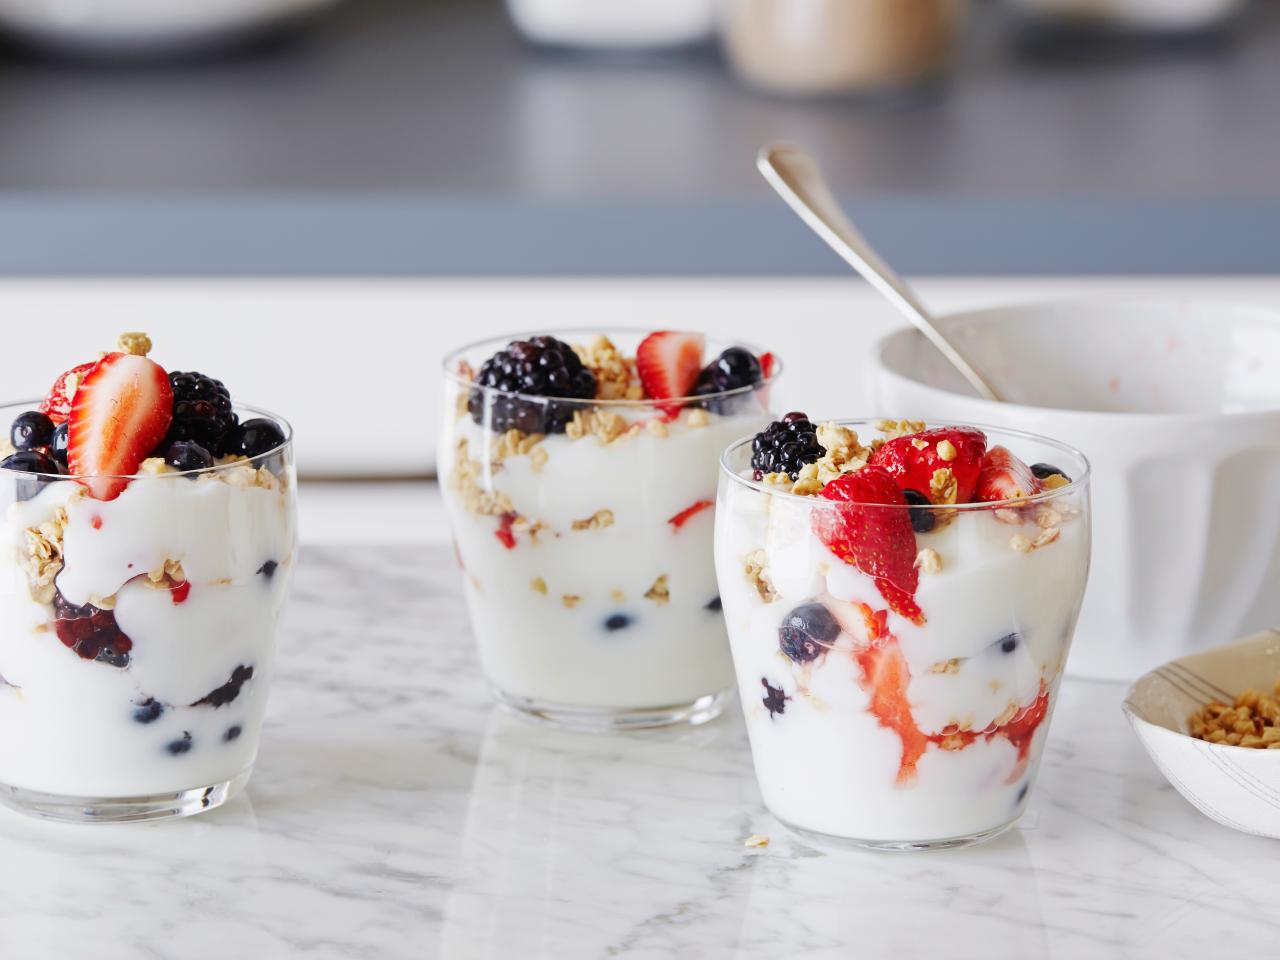 How to Make Yogurt Parfait: 12 Steps (with Pictures) - wikiHow